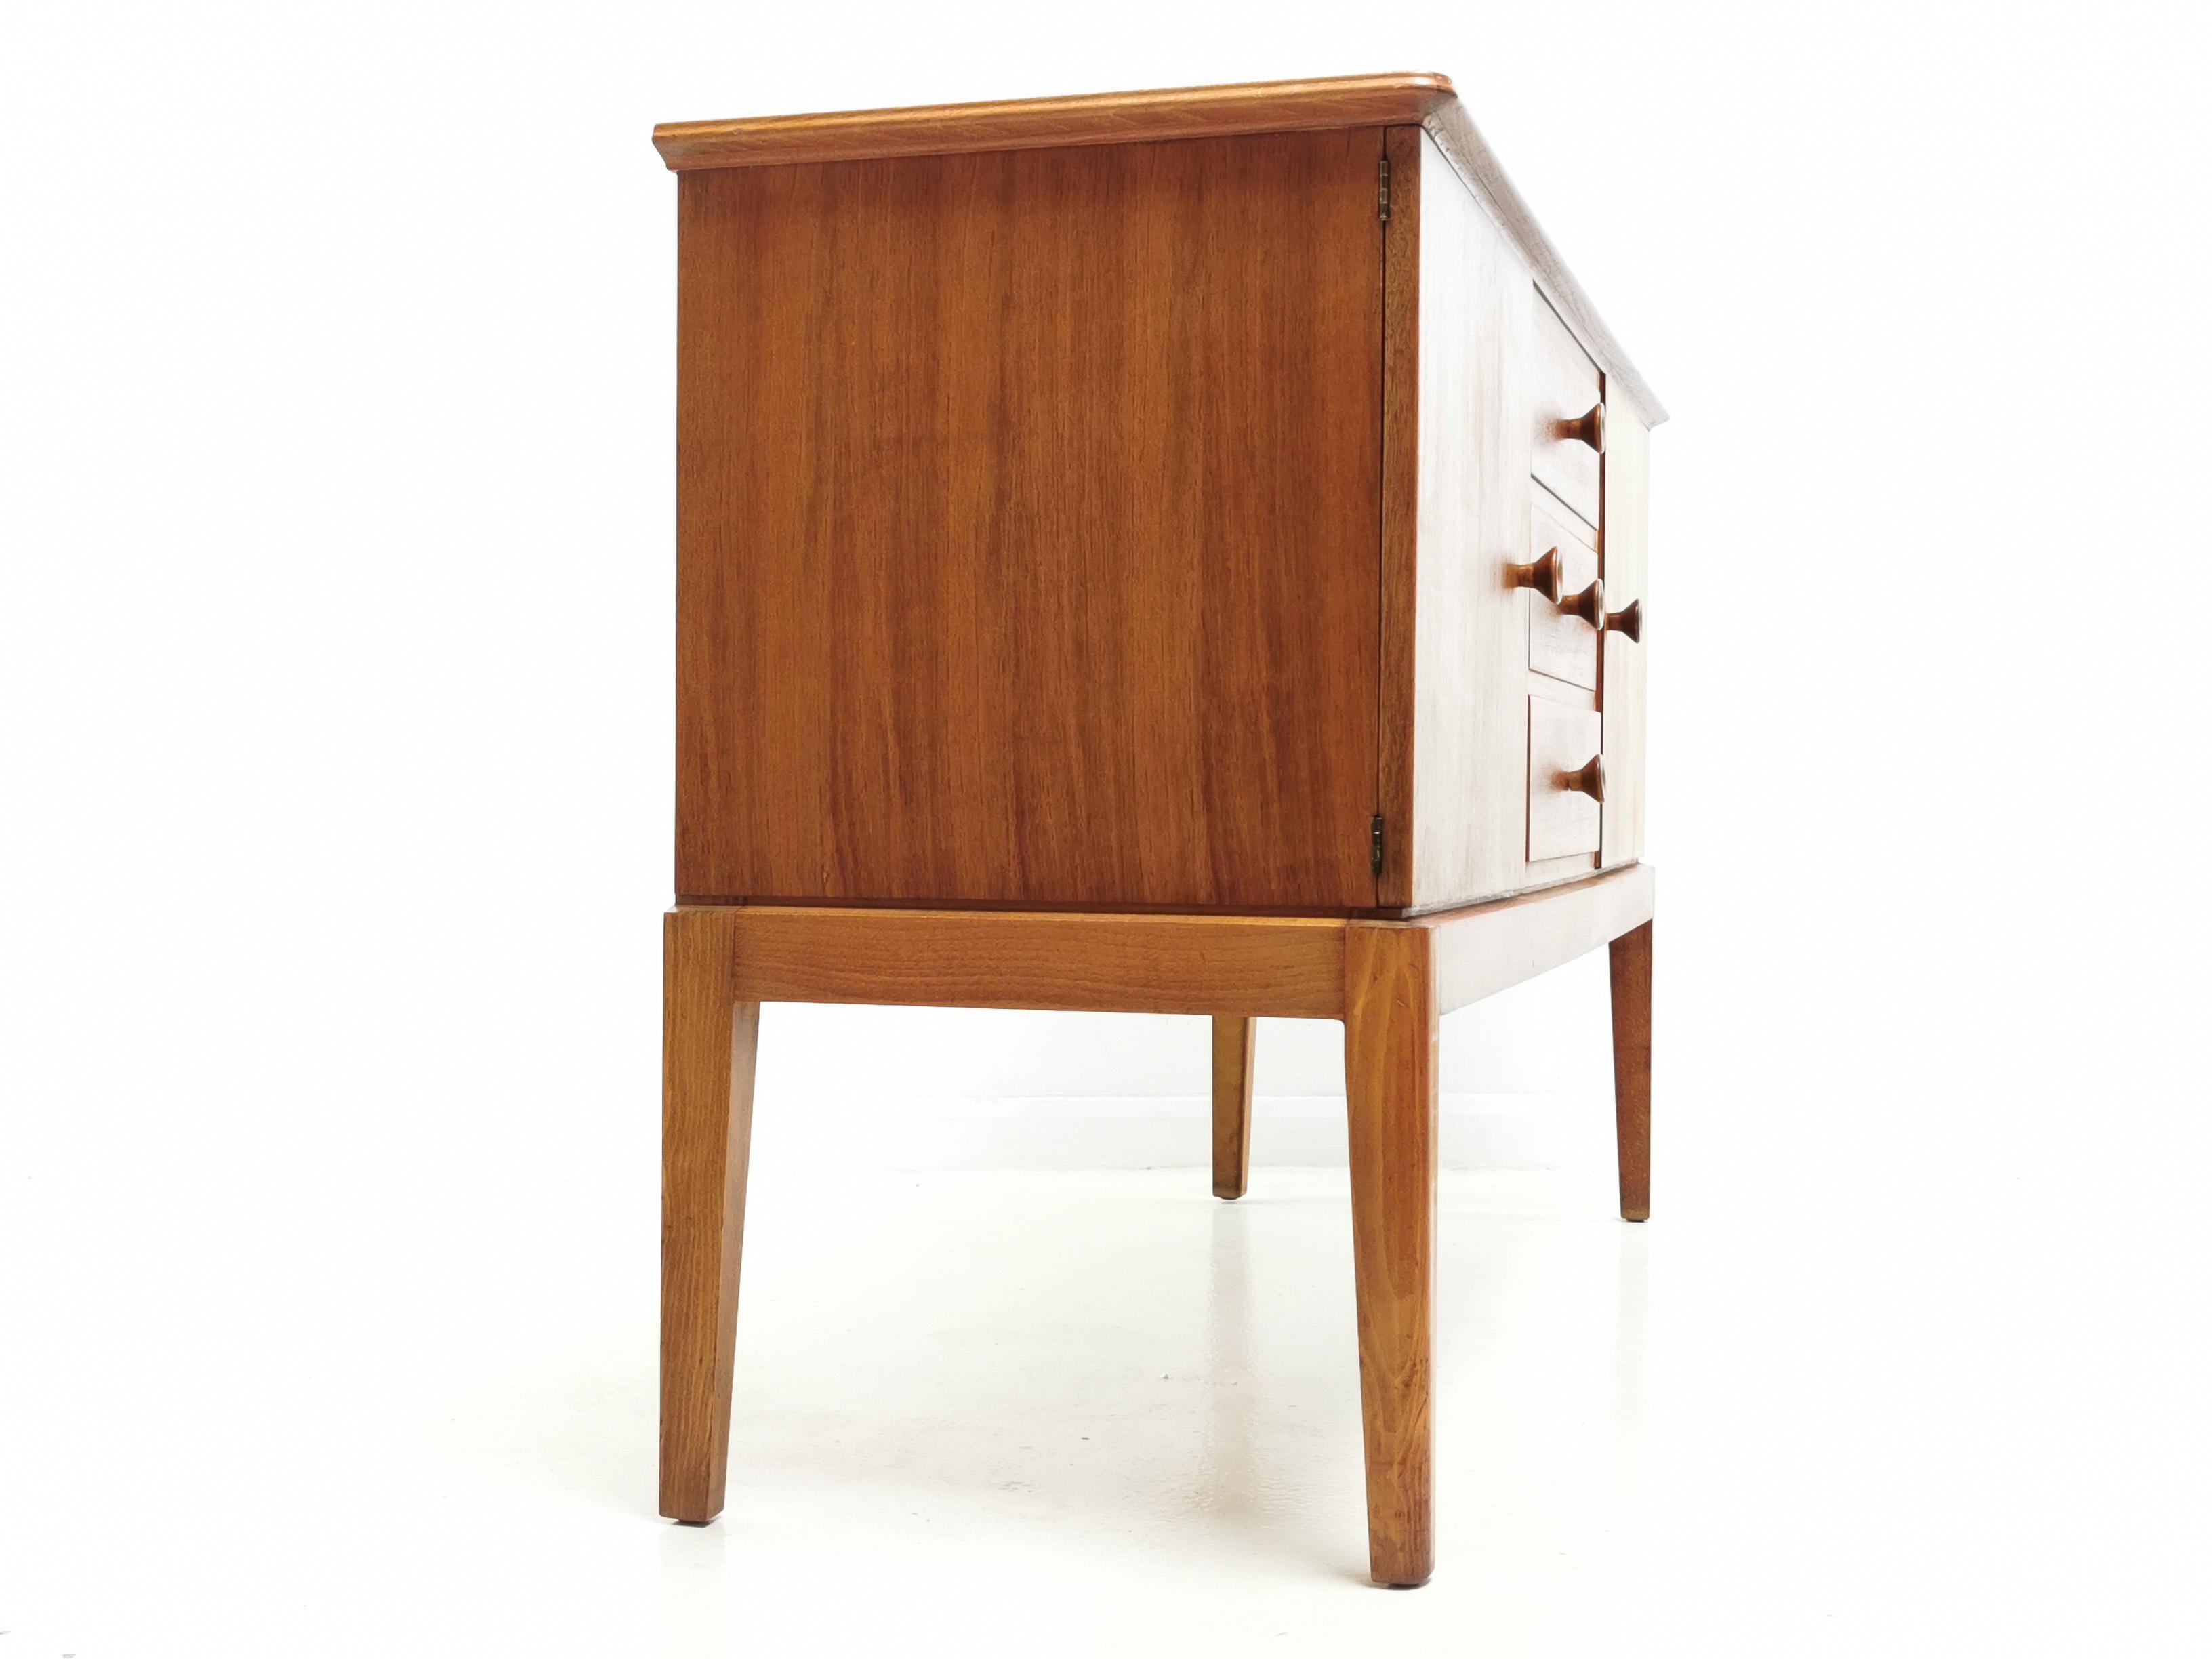 Gordon Russell midcentury sideboard

A British sideboard by Gordon Russell of Broadway and retailed through Heal's of London.

As with all Gordon Russell furniture of this period it is made to the highest standard and is of exceptional quality.